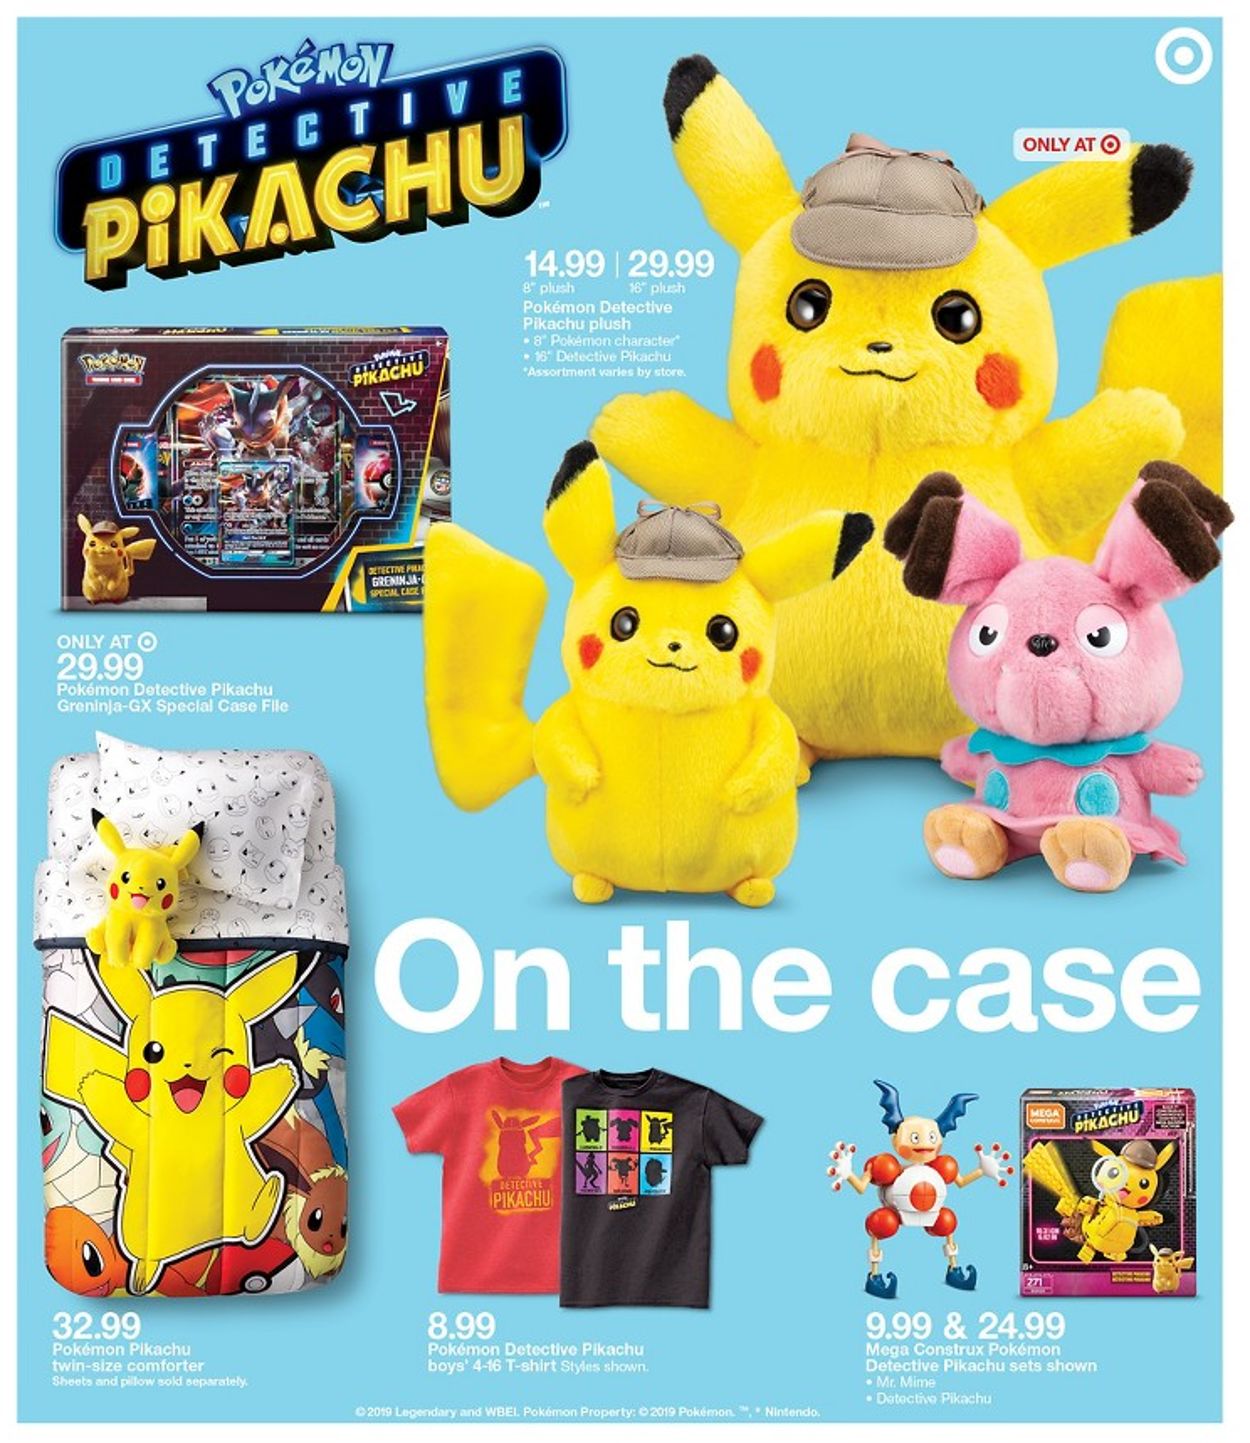 Detective Pikachu Plush Target Cheaper Than Retail Price Buy Clothing Accessories And Lifestyle Products For Women Men